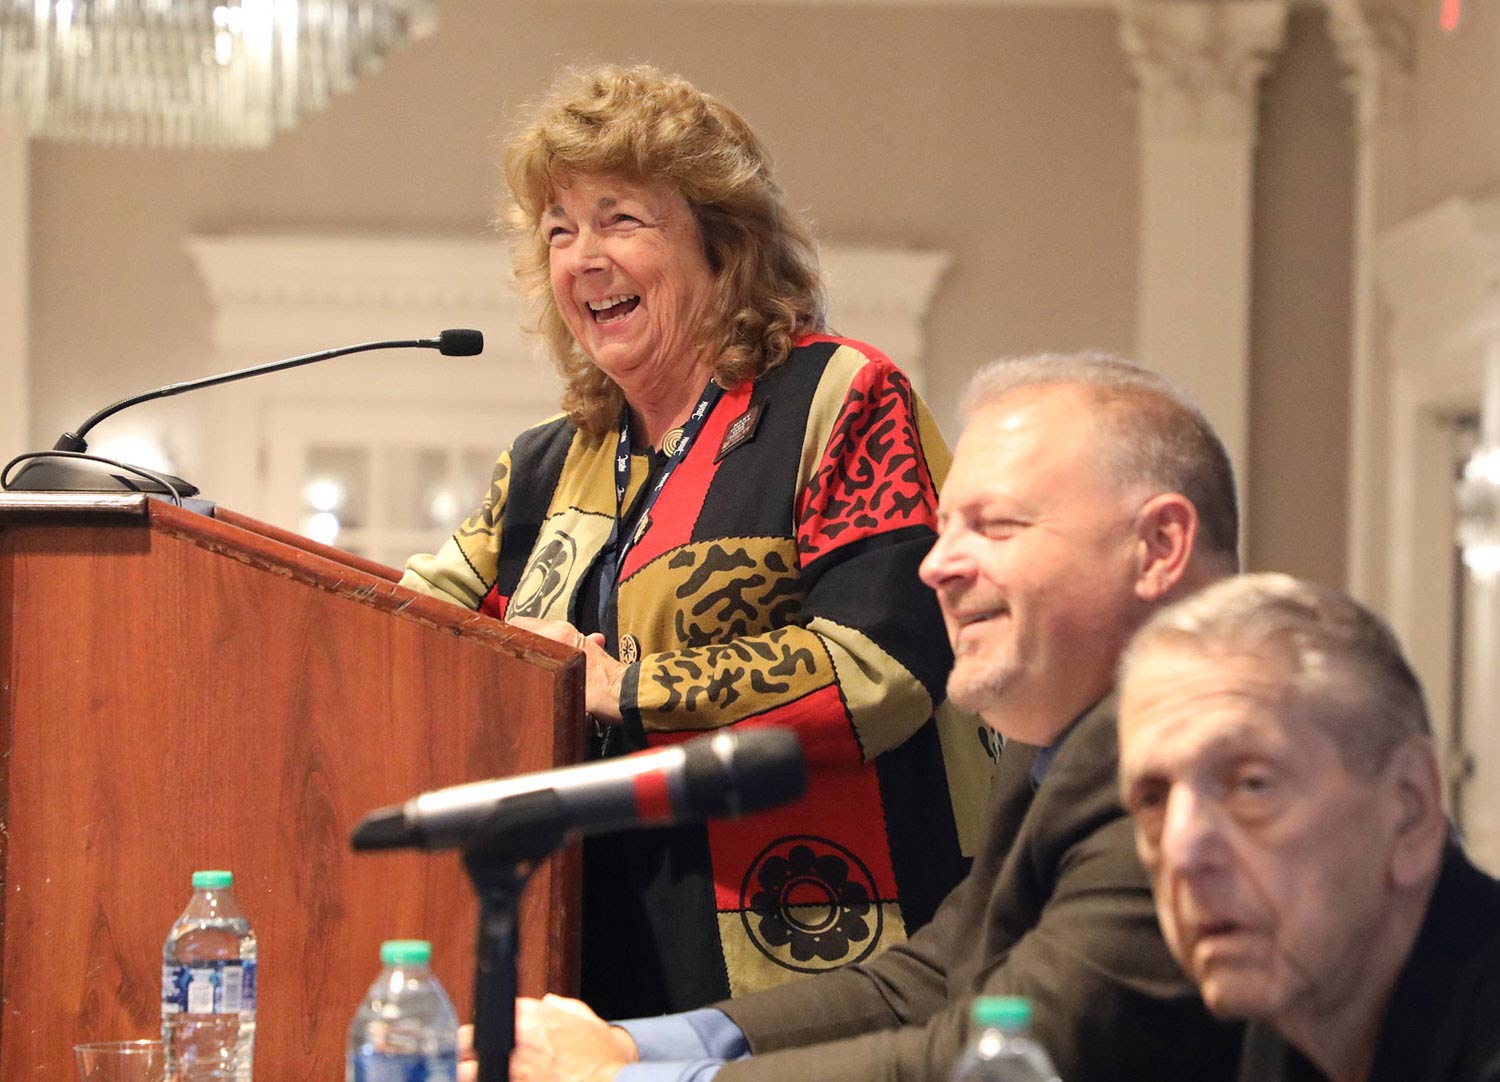 Florence McCue speaking at a podium with two men sitting in the foreground